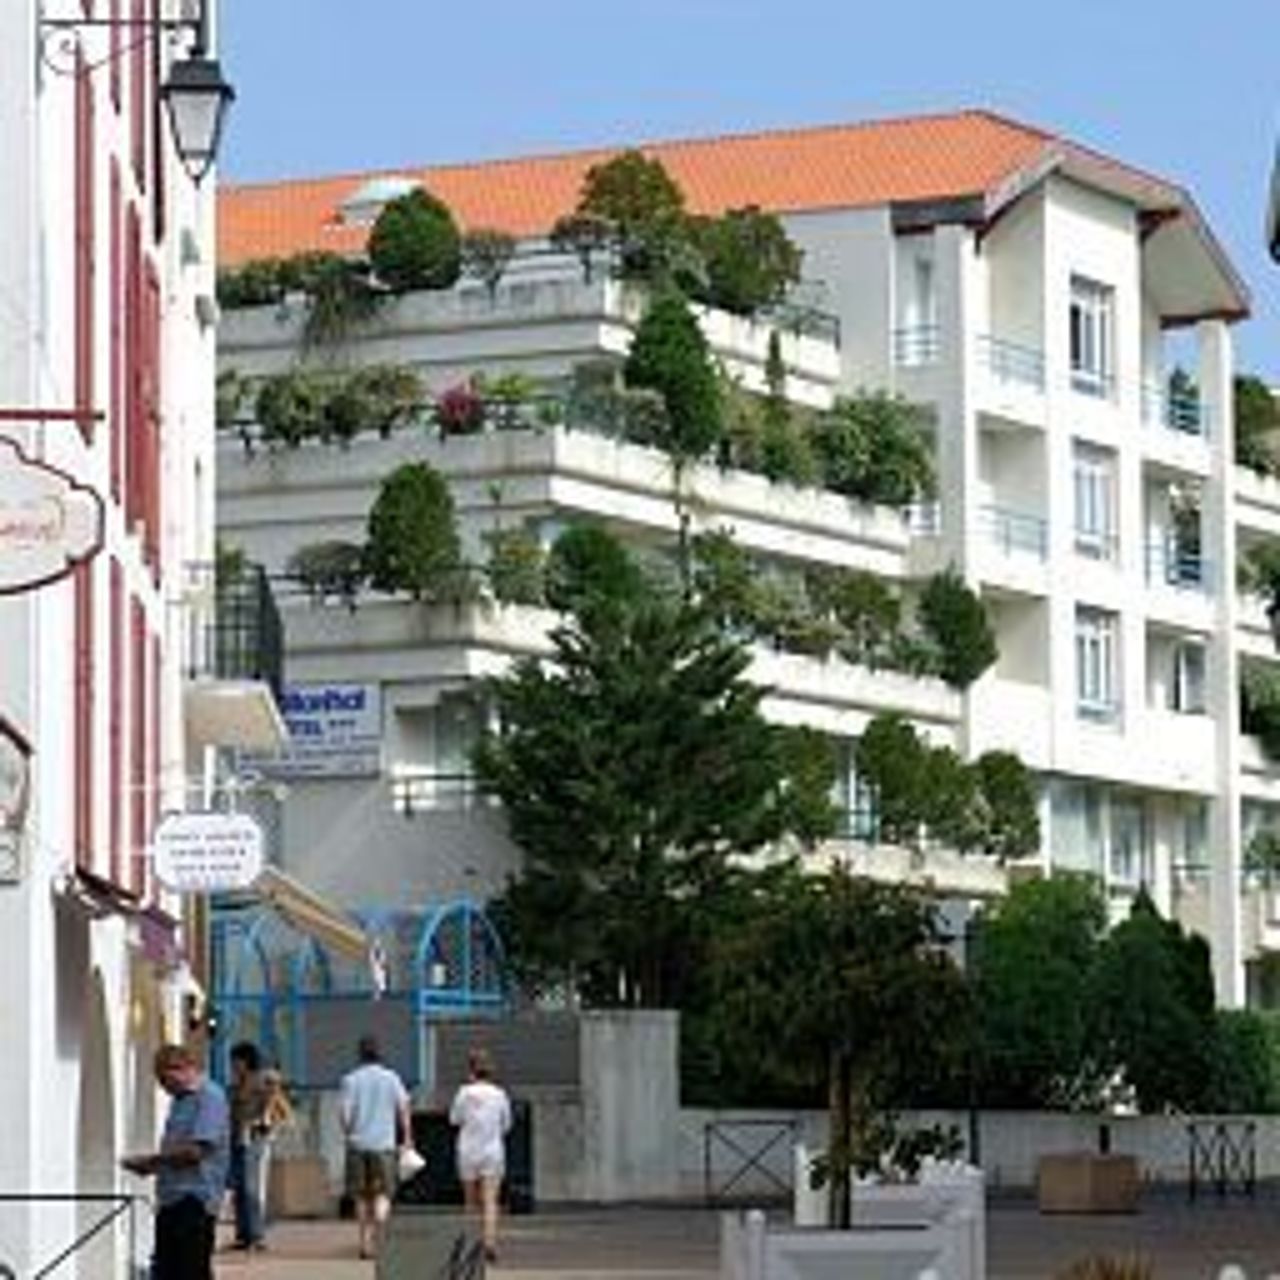 Hotel Helianthal Saint-Jean-de-Luz - Great prices at HOTEL INFO